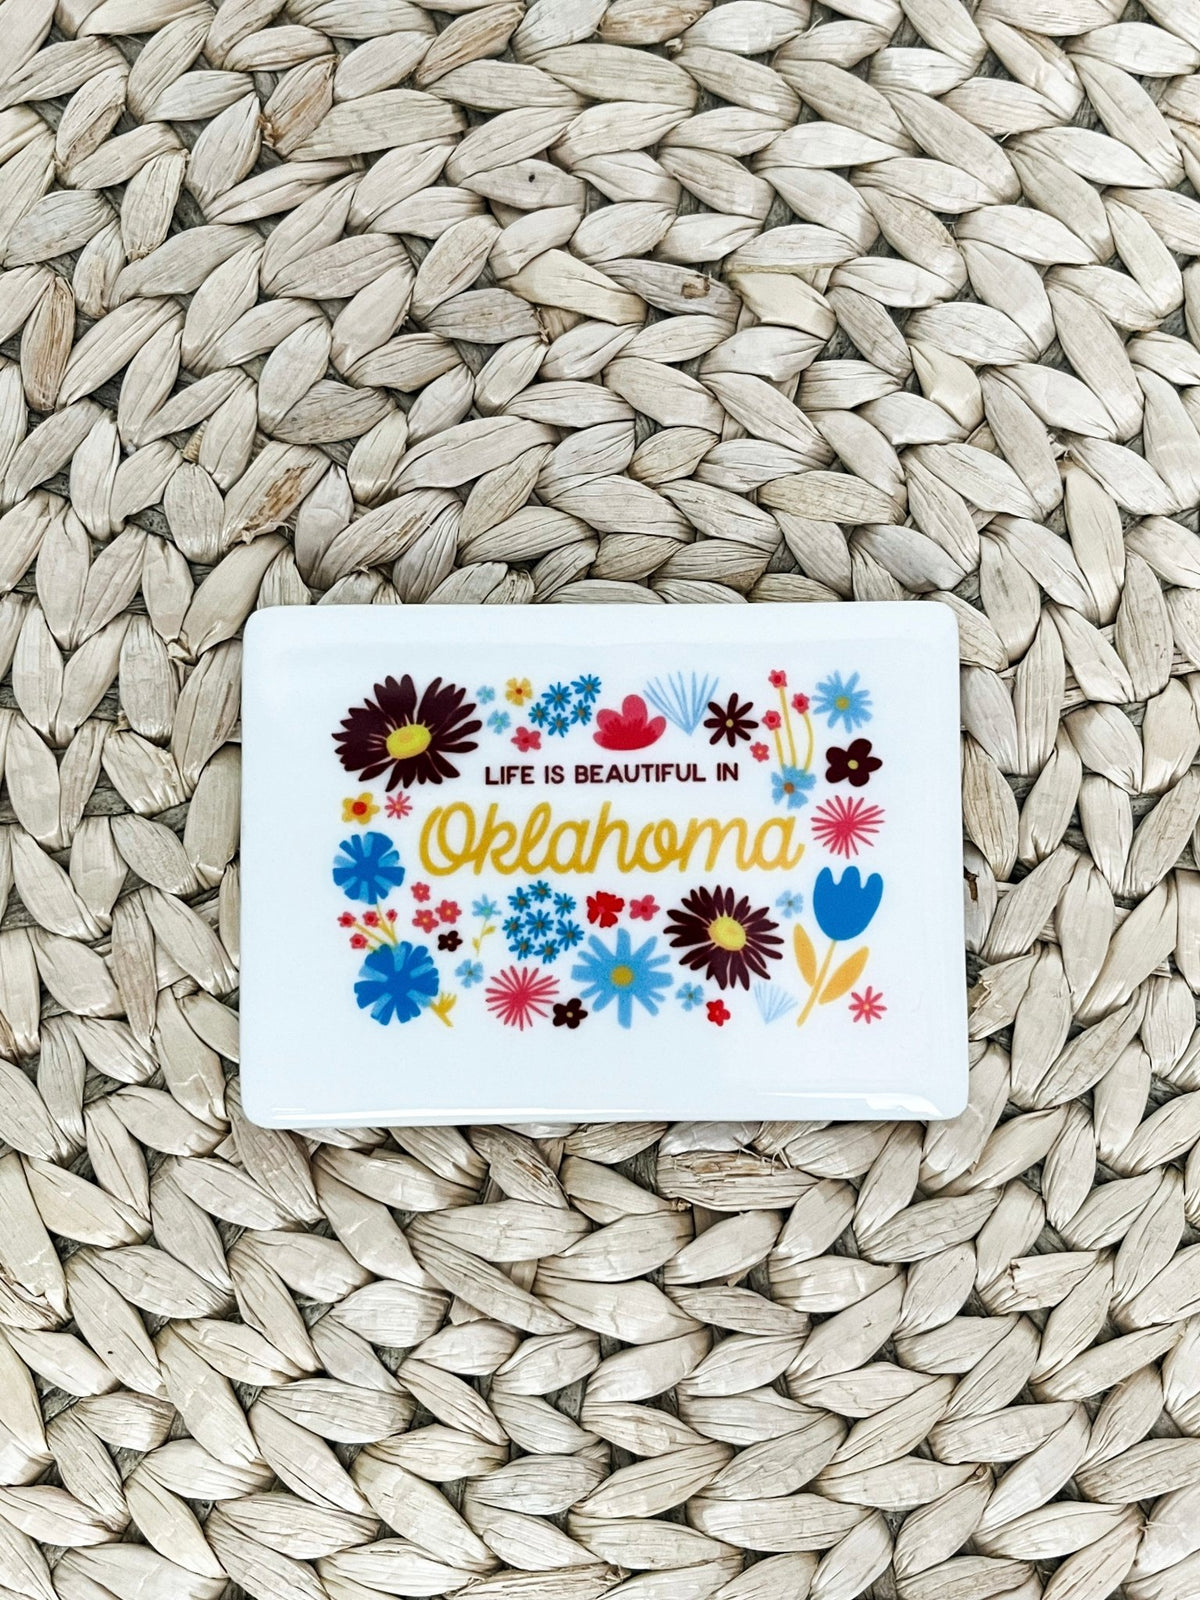 Life is beautiful in Oklahoma magnet - Trendy Gifts at Lush Fashion Lounge Boutique in Oklahoma City